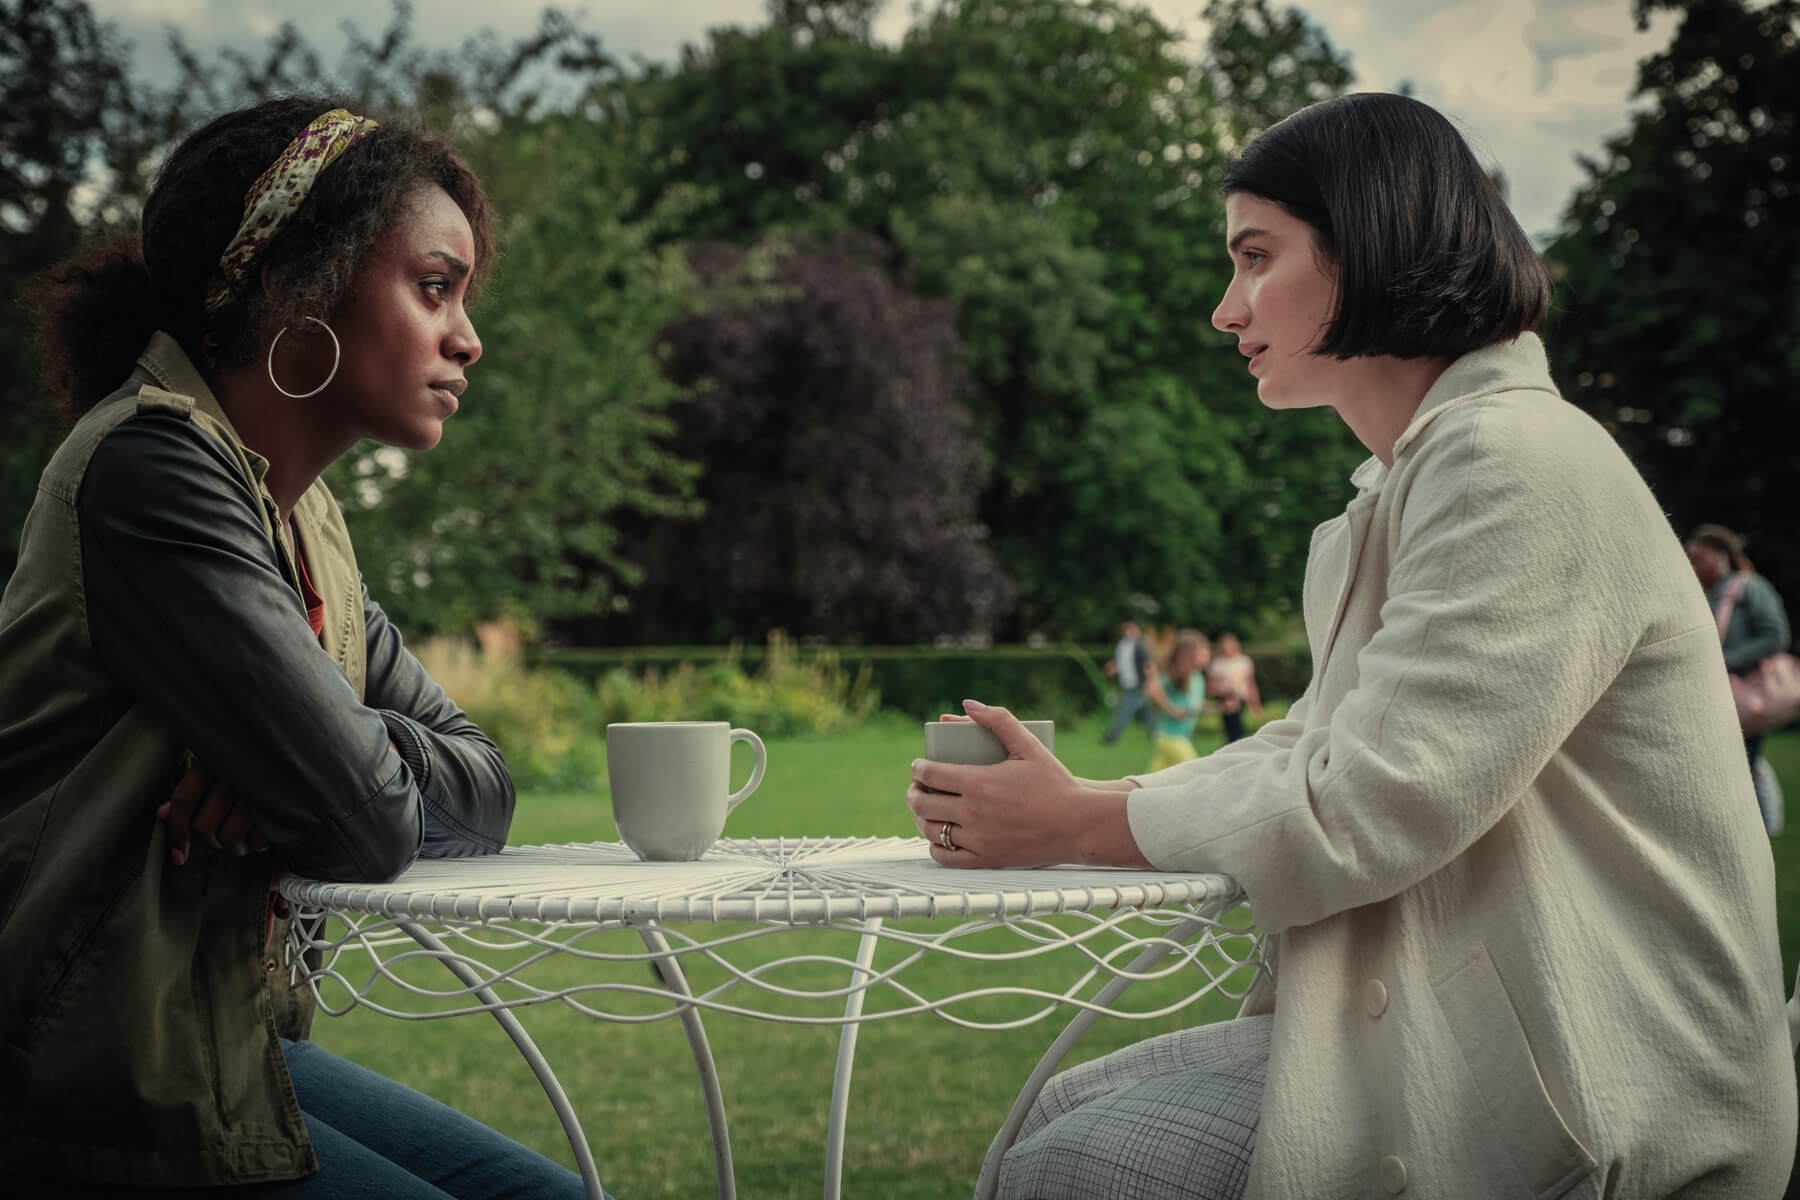 Eve Hewson and Simona Brown sit at a coffee table outdoors in character for Behind Her Eyes